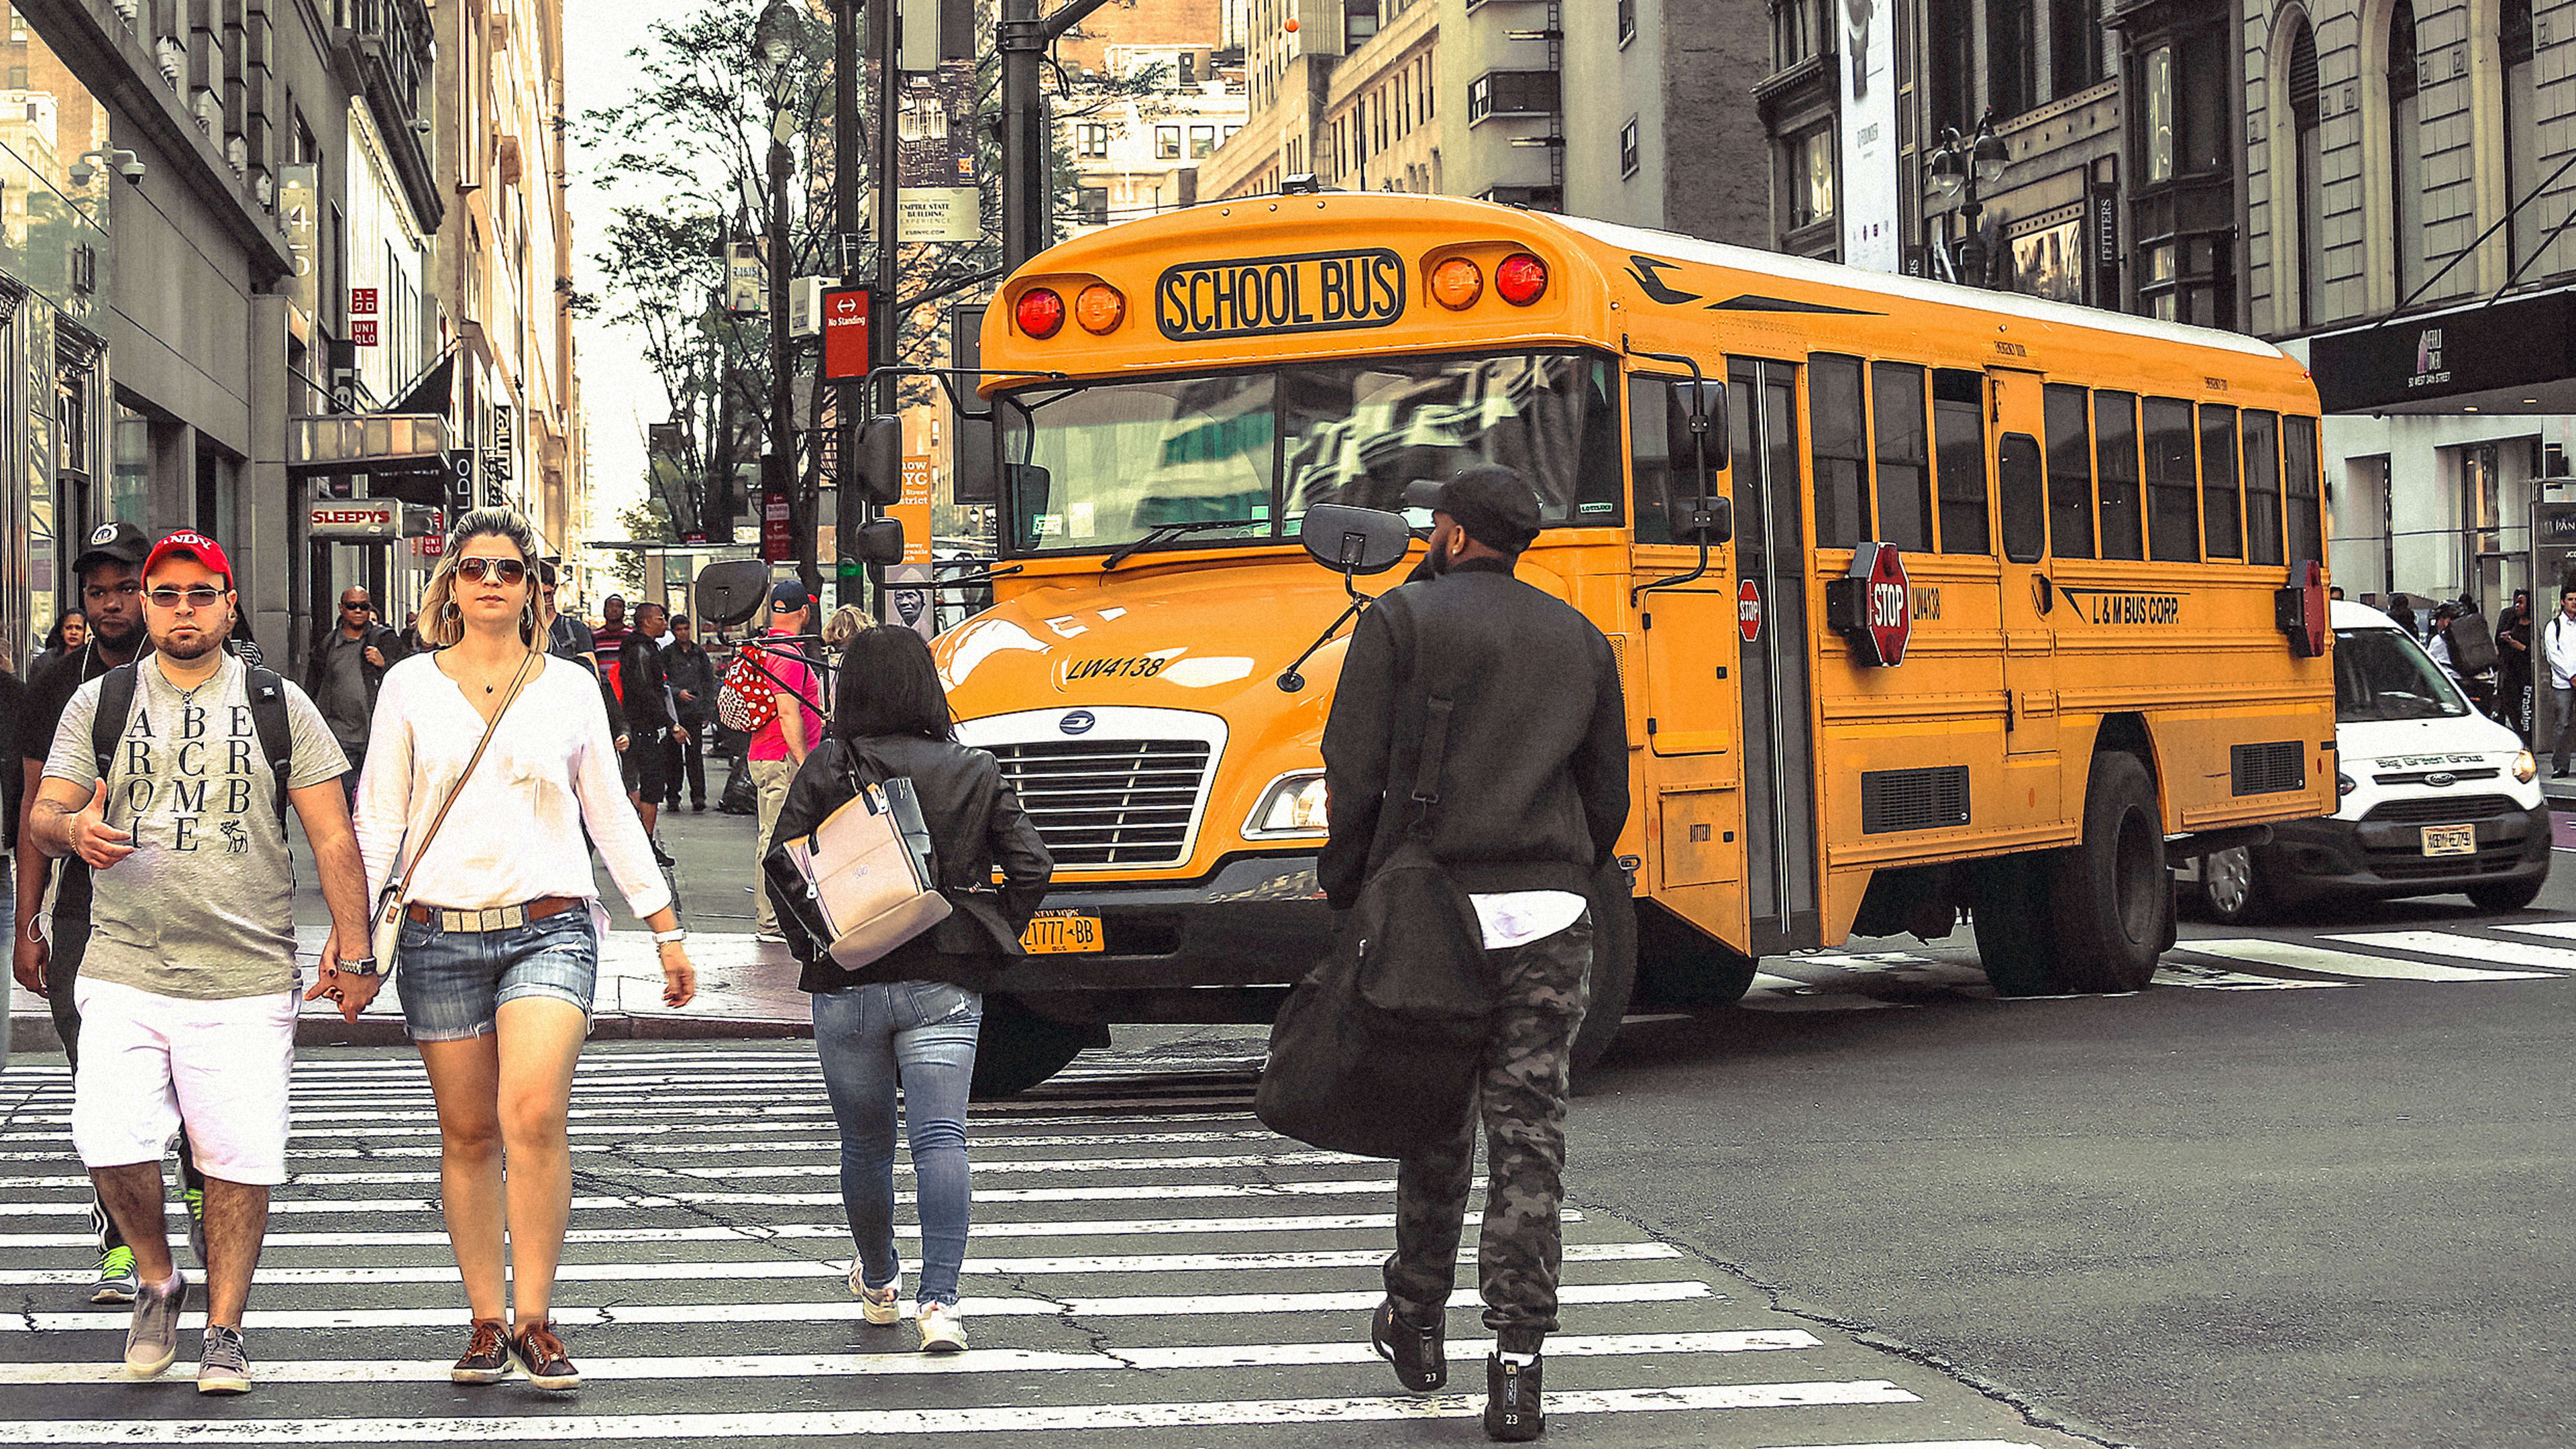 New York City’s school buses will now be automatically routed and tracked using Via’s algorithm